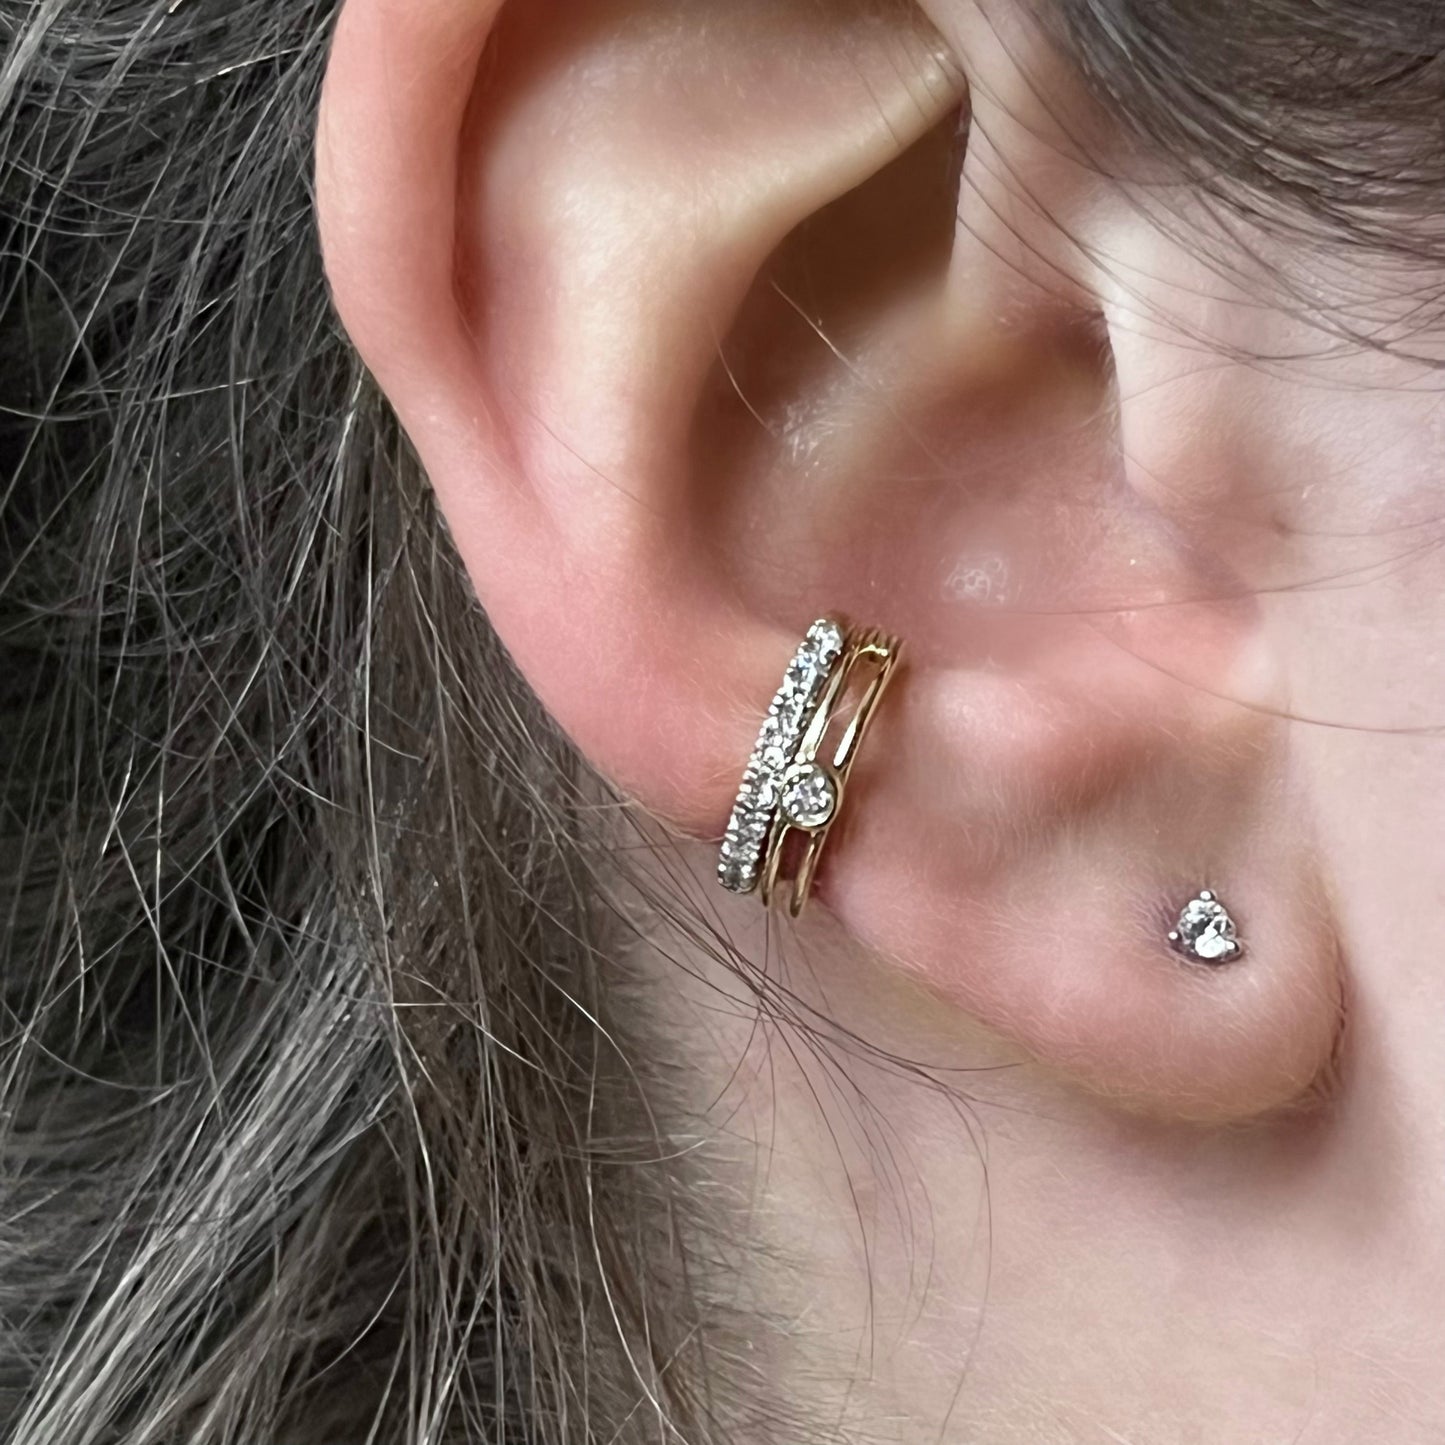 With-the-Band Ear Cuff in 14K Gold